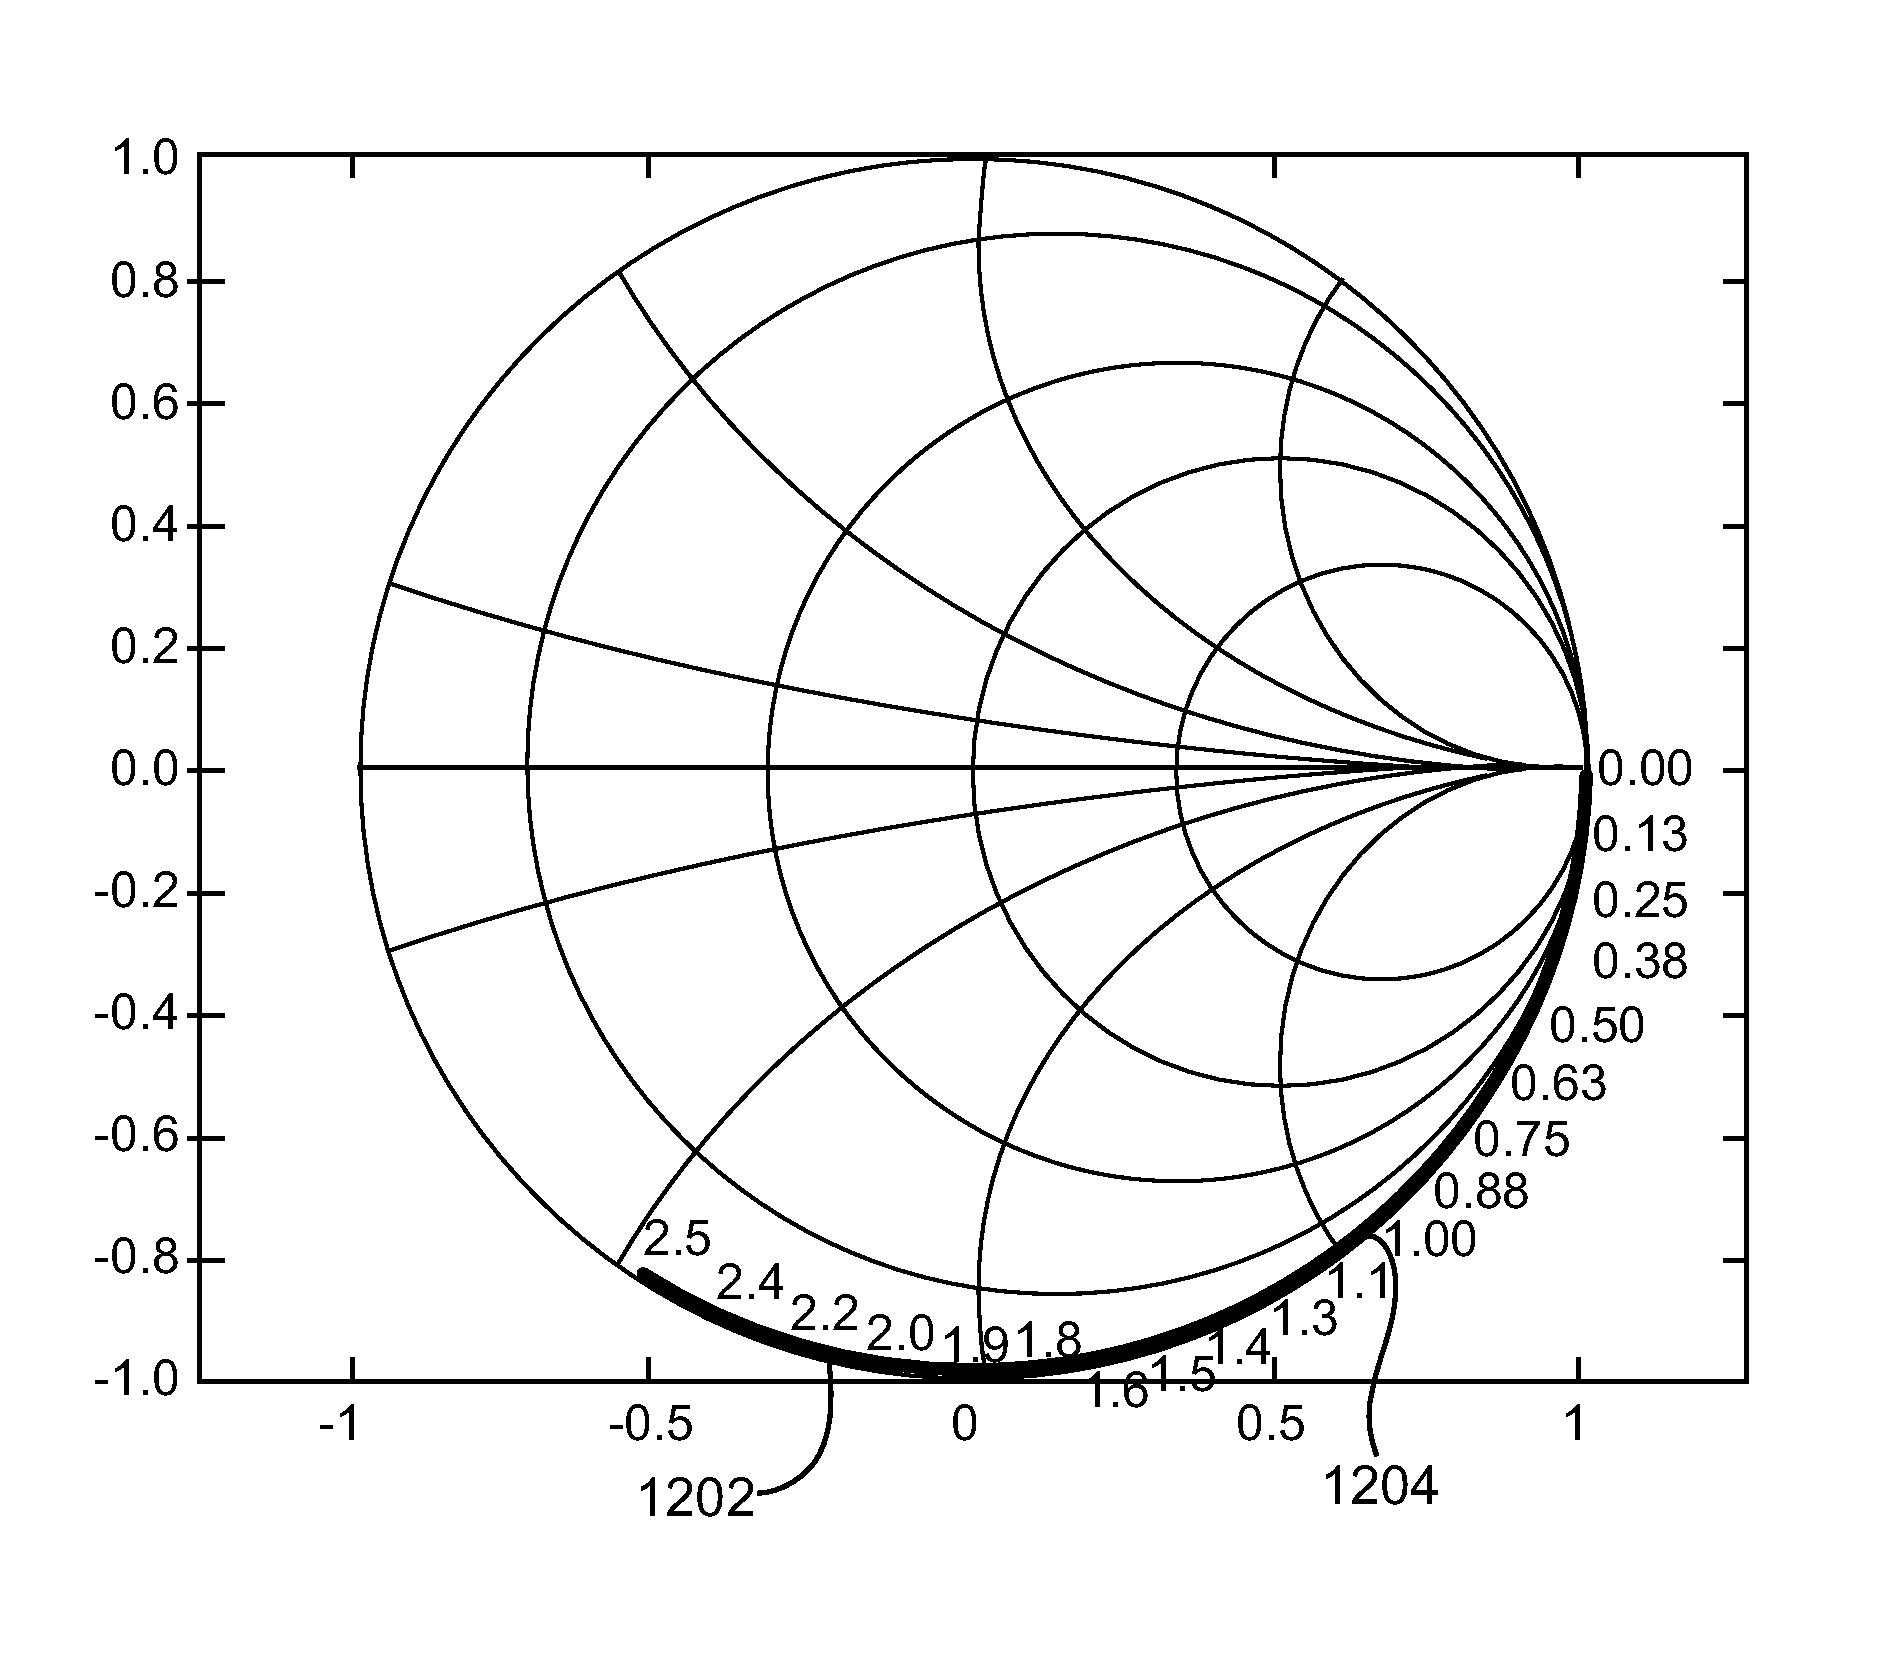 Use of smith chart to compensate for missing data on network performance at lower frequency